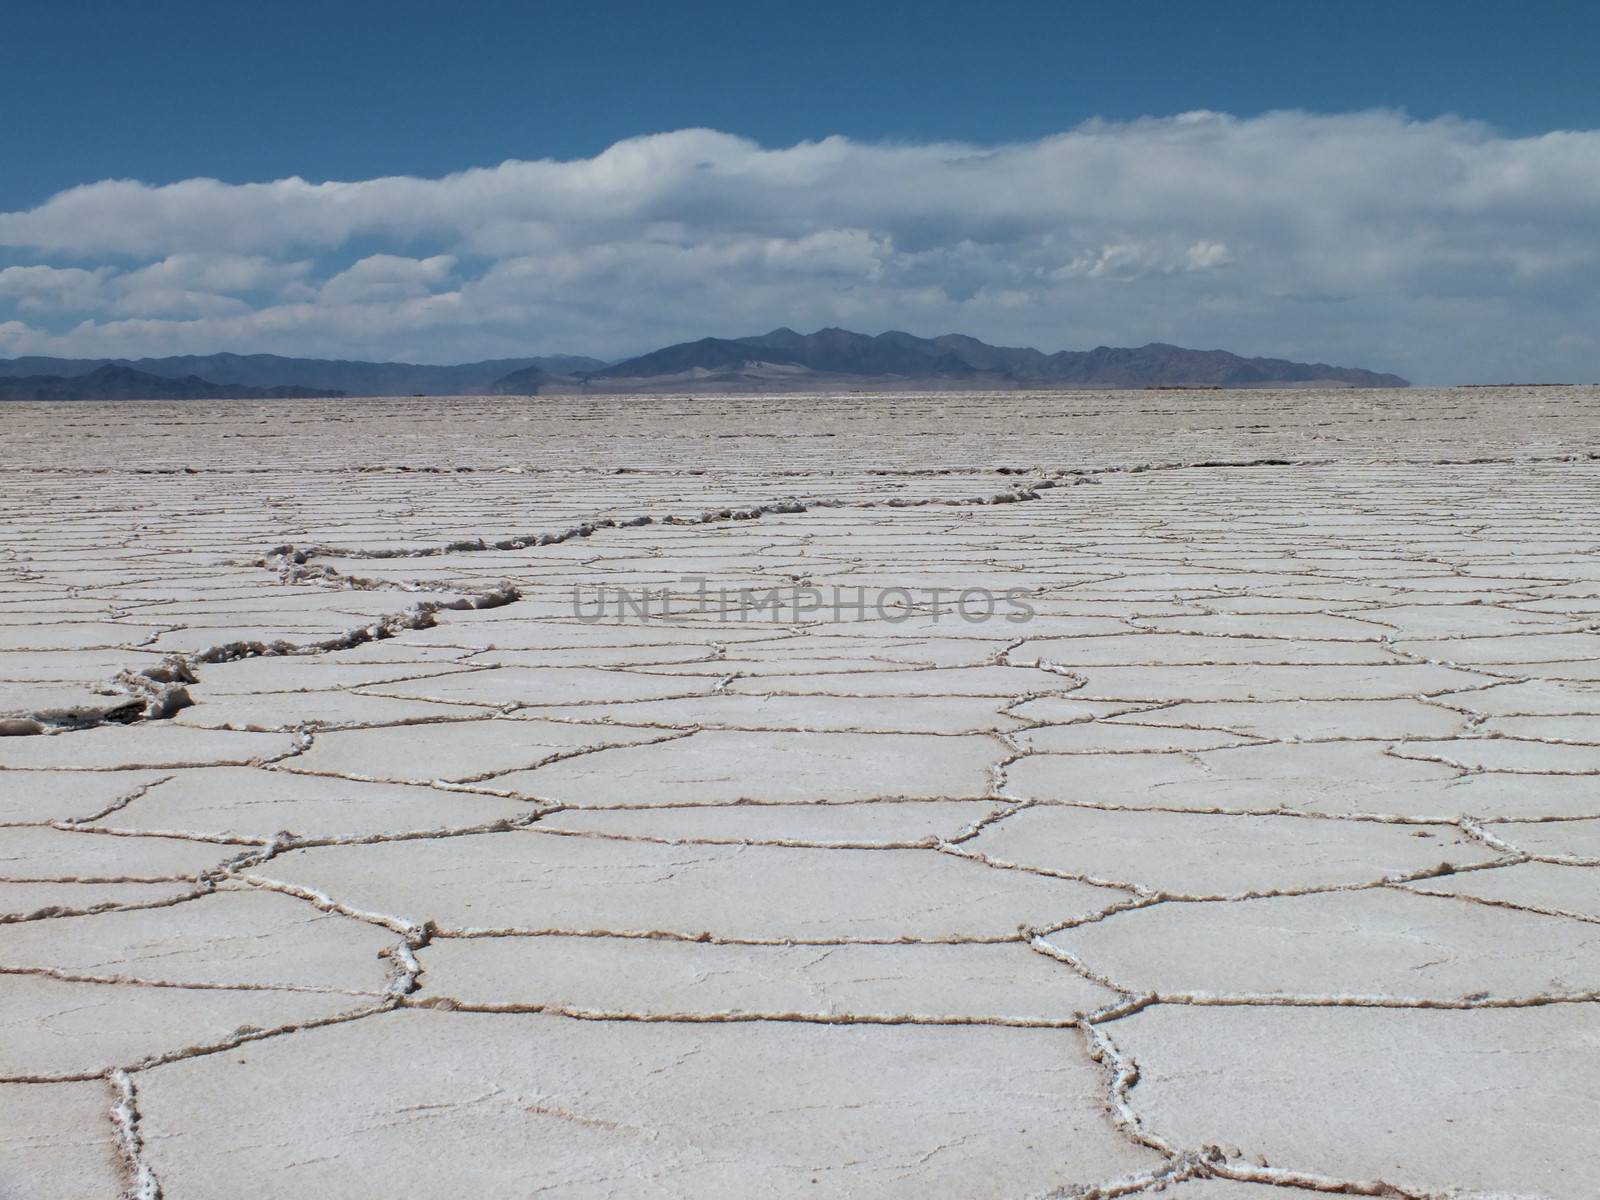 The Salinas Grandes salt flats extend over a 300 square mile area in NW Argentina. This kind of terminal high desert dry lake or salt flat occurs when water containing salt and minerals invades a low area and eventually evaporates leaving behind a deposit of salt. The area floods during the rainy season in the summer and the salt is harvested in the following winter and spring